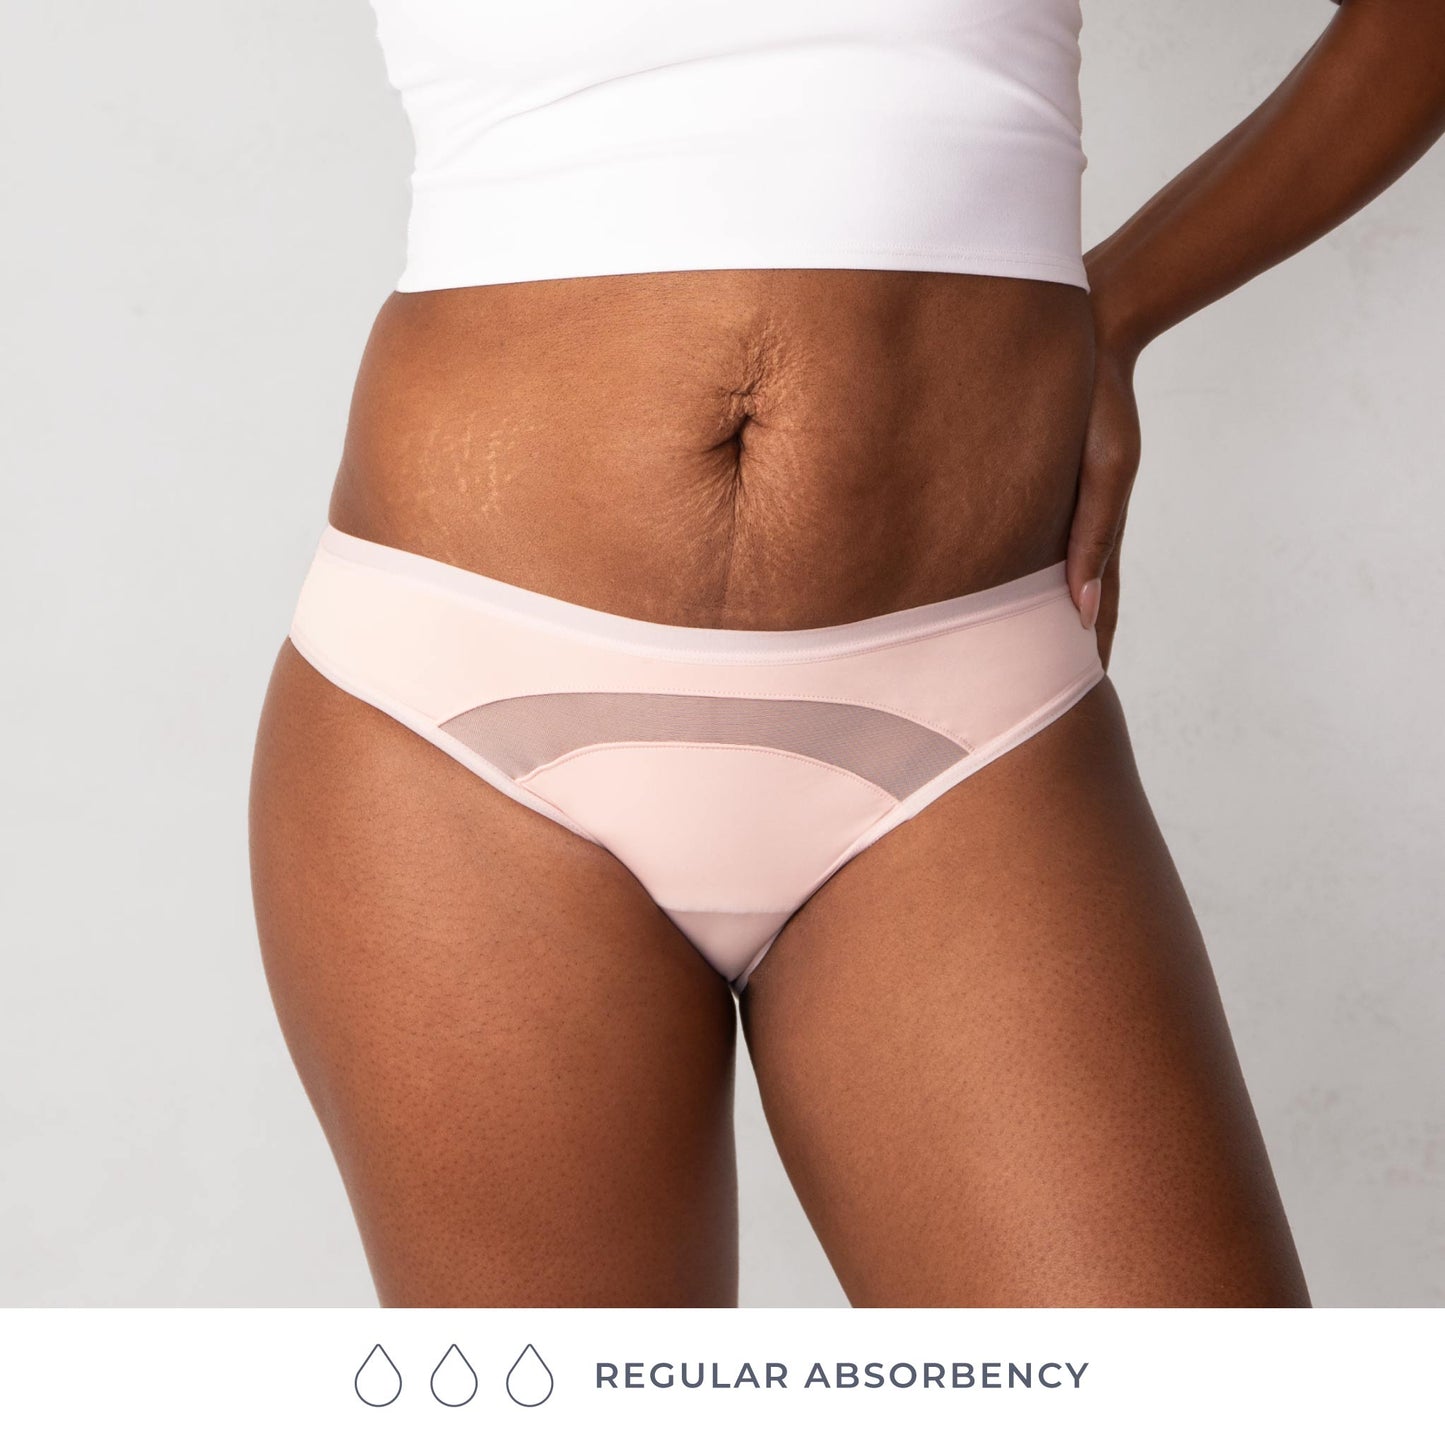 Period proof: There's something different about this bikini